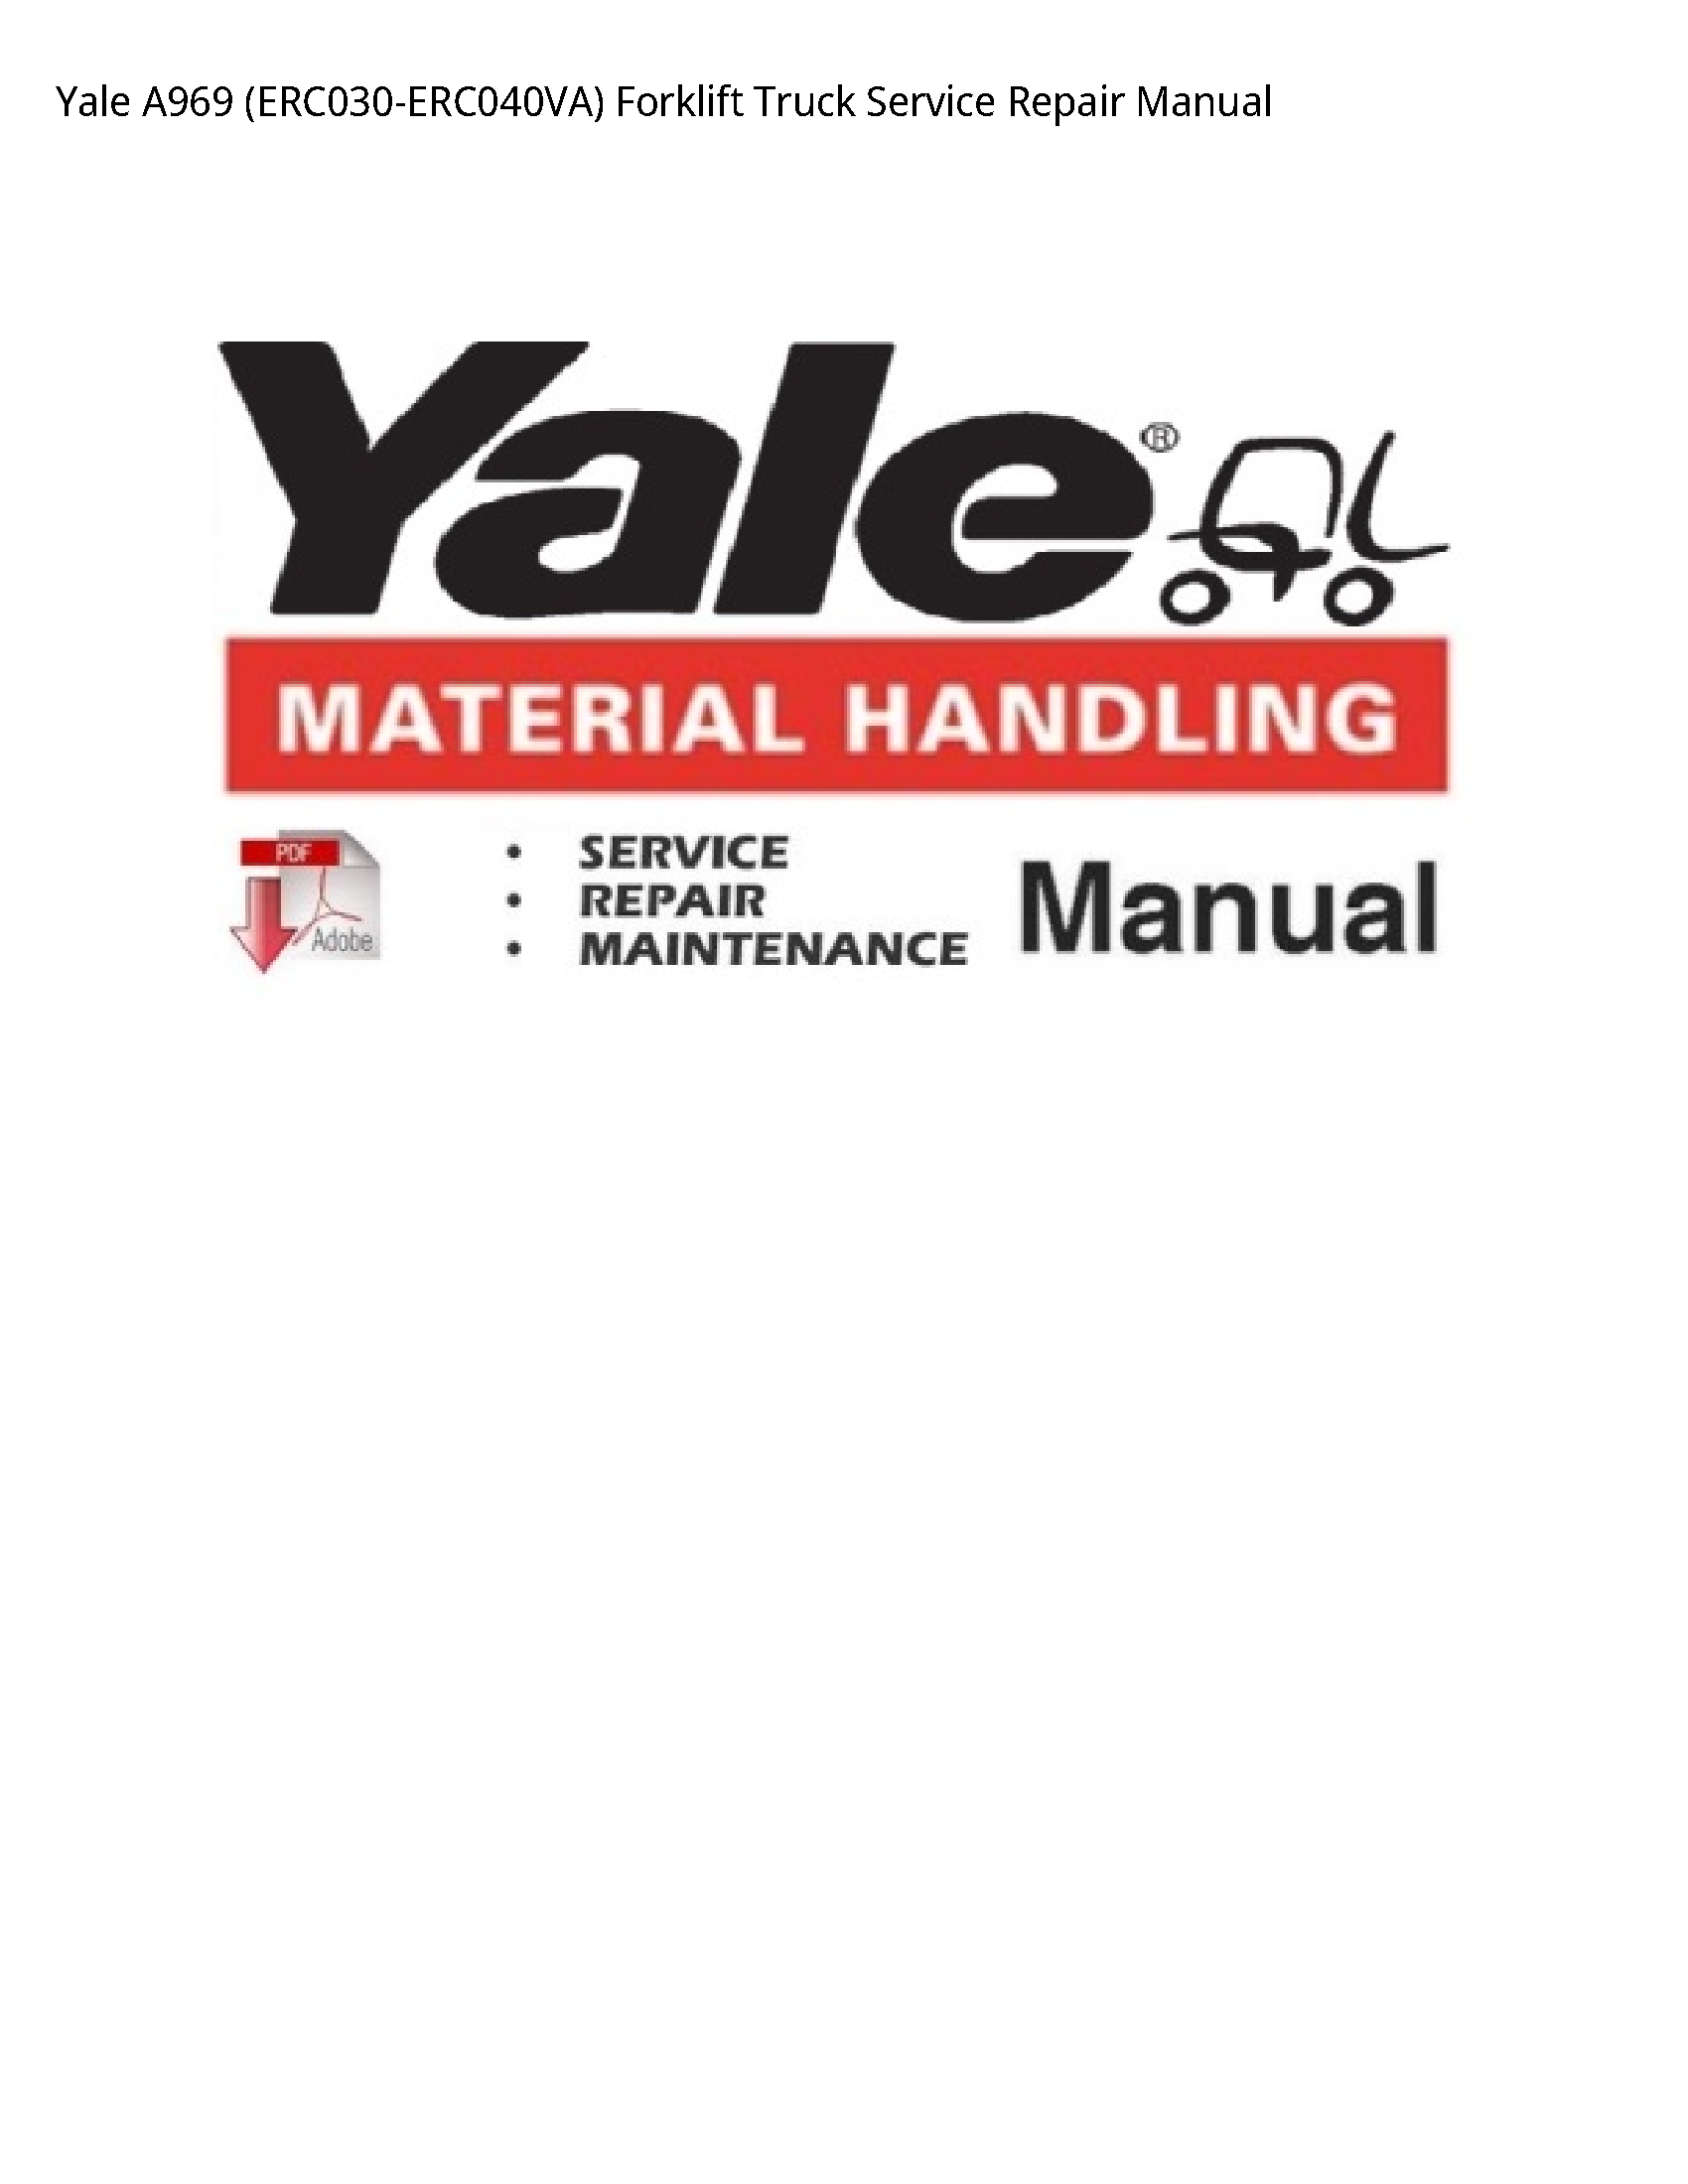 Yale A969 Forklift Truck manual